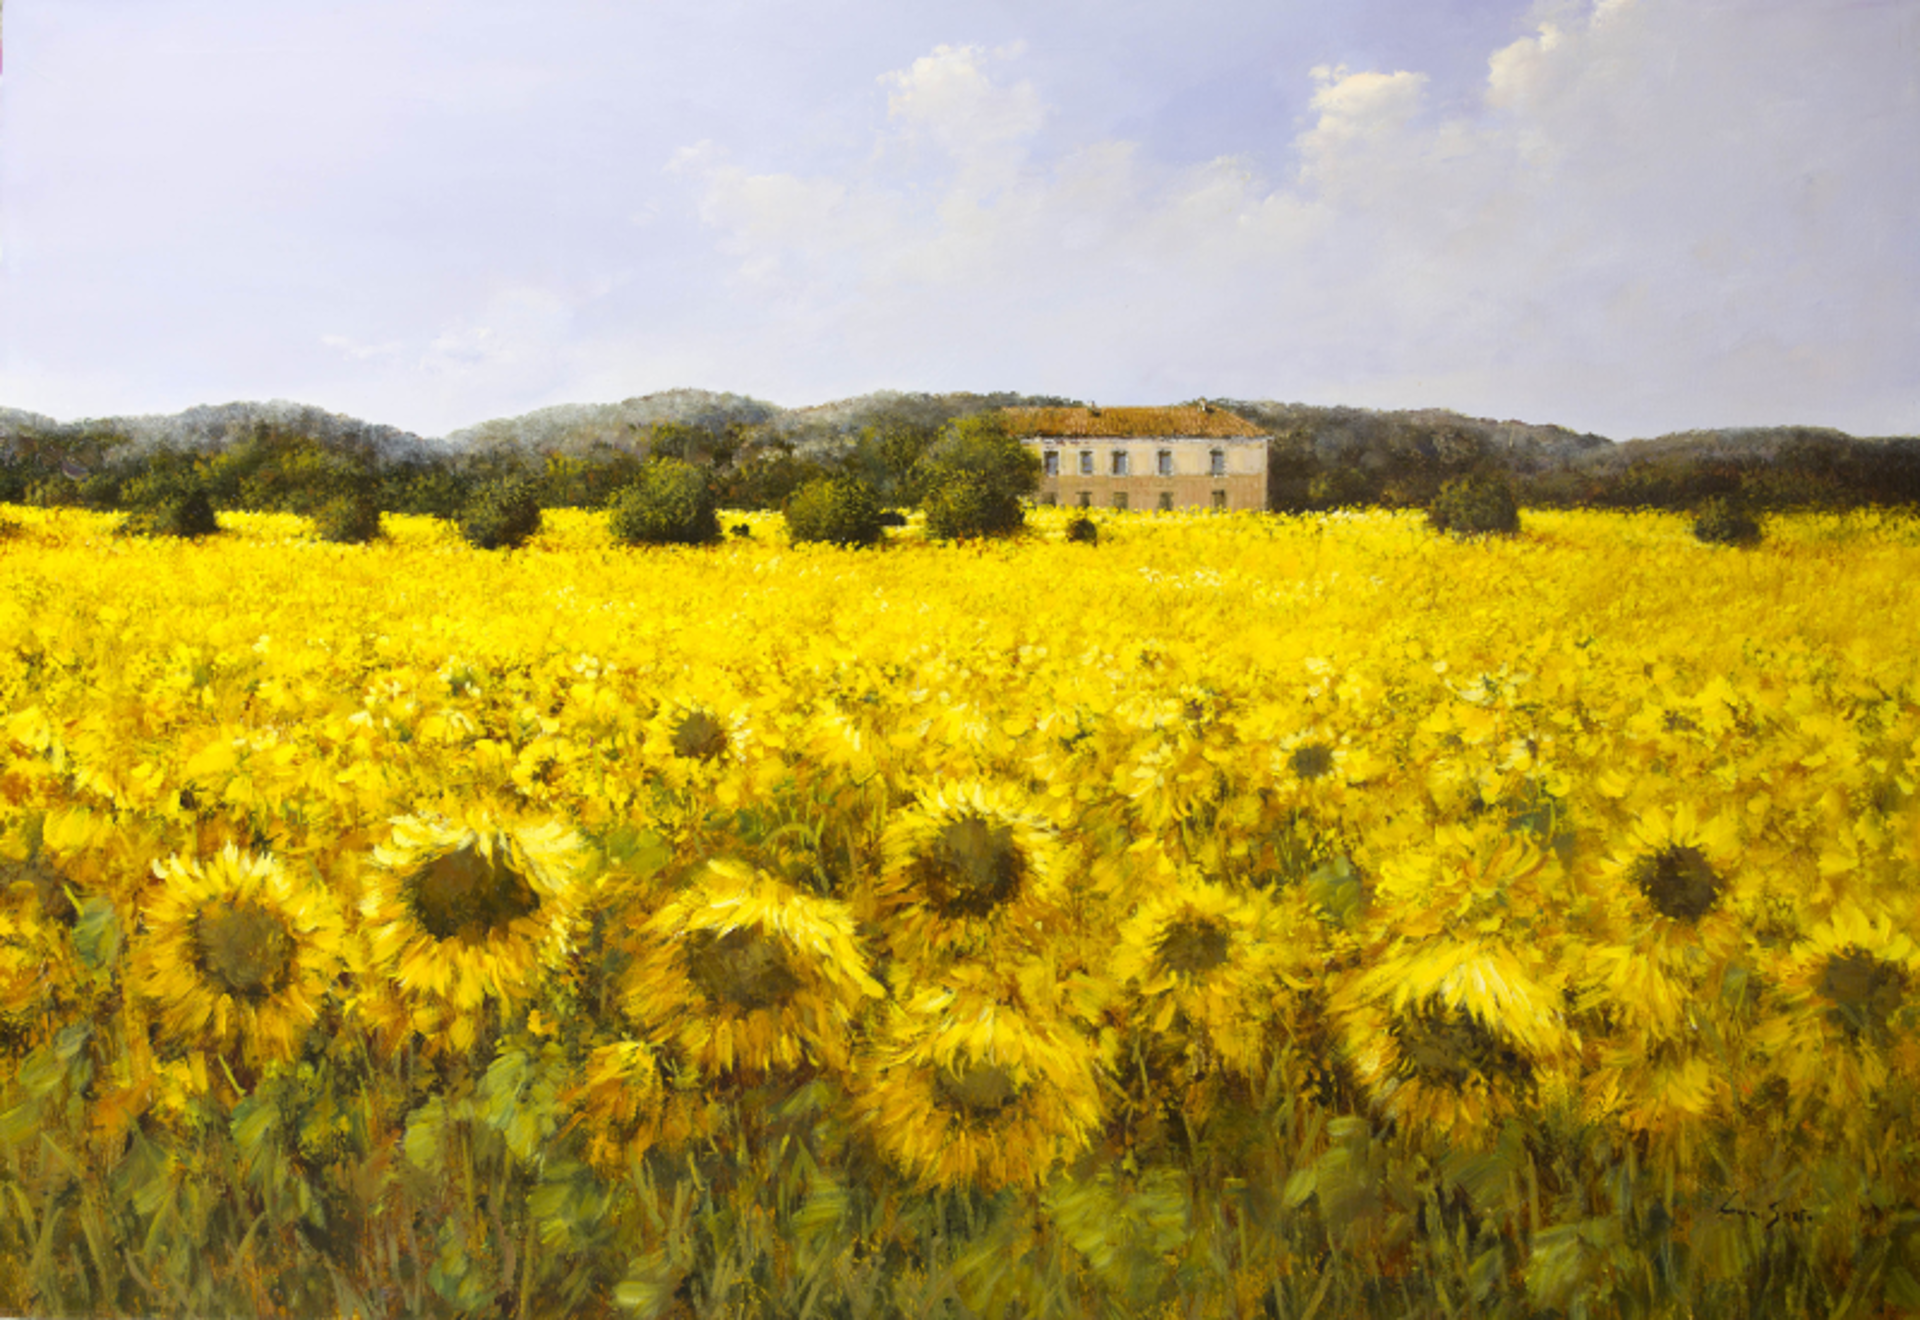 Sunflowers by Lucia Sarto